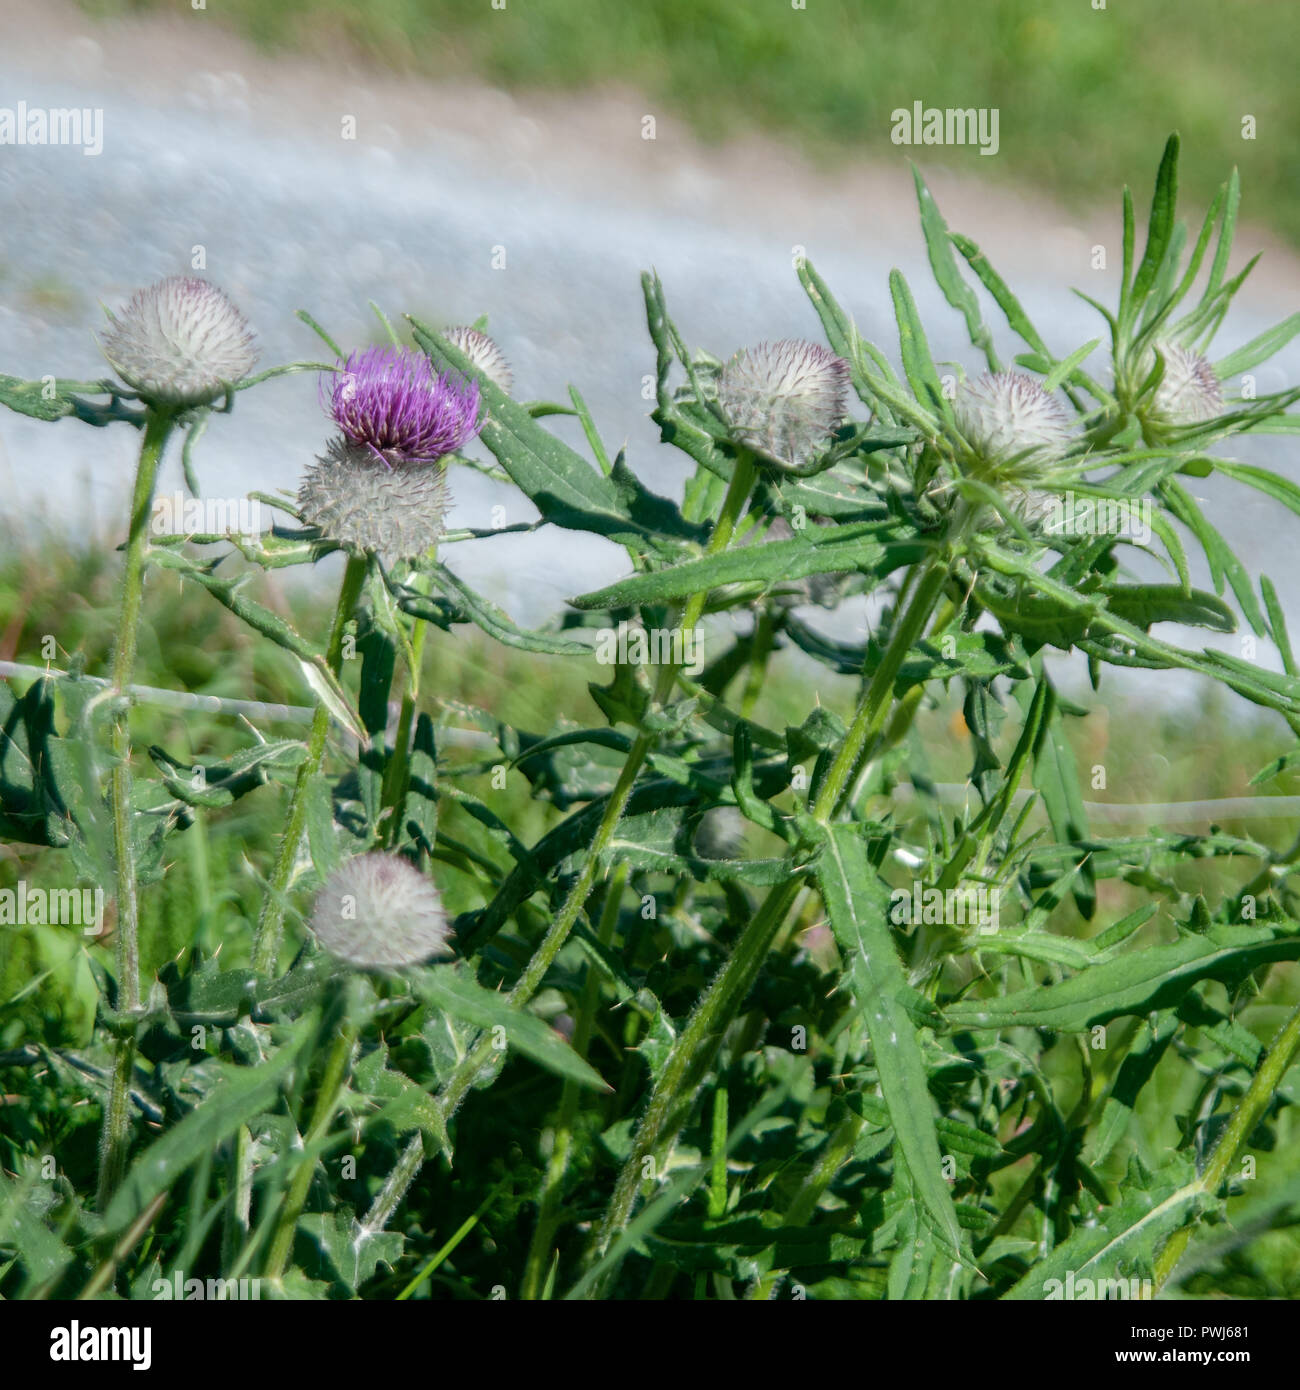 Cirsium eriophorum, the woolly thistle, is a herbaceous biennial species of the genus Cirsium. It is widespread across much of Europe. It is a large,  Stock Photo